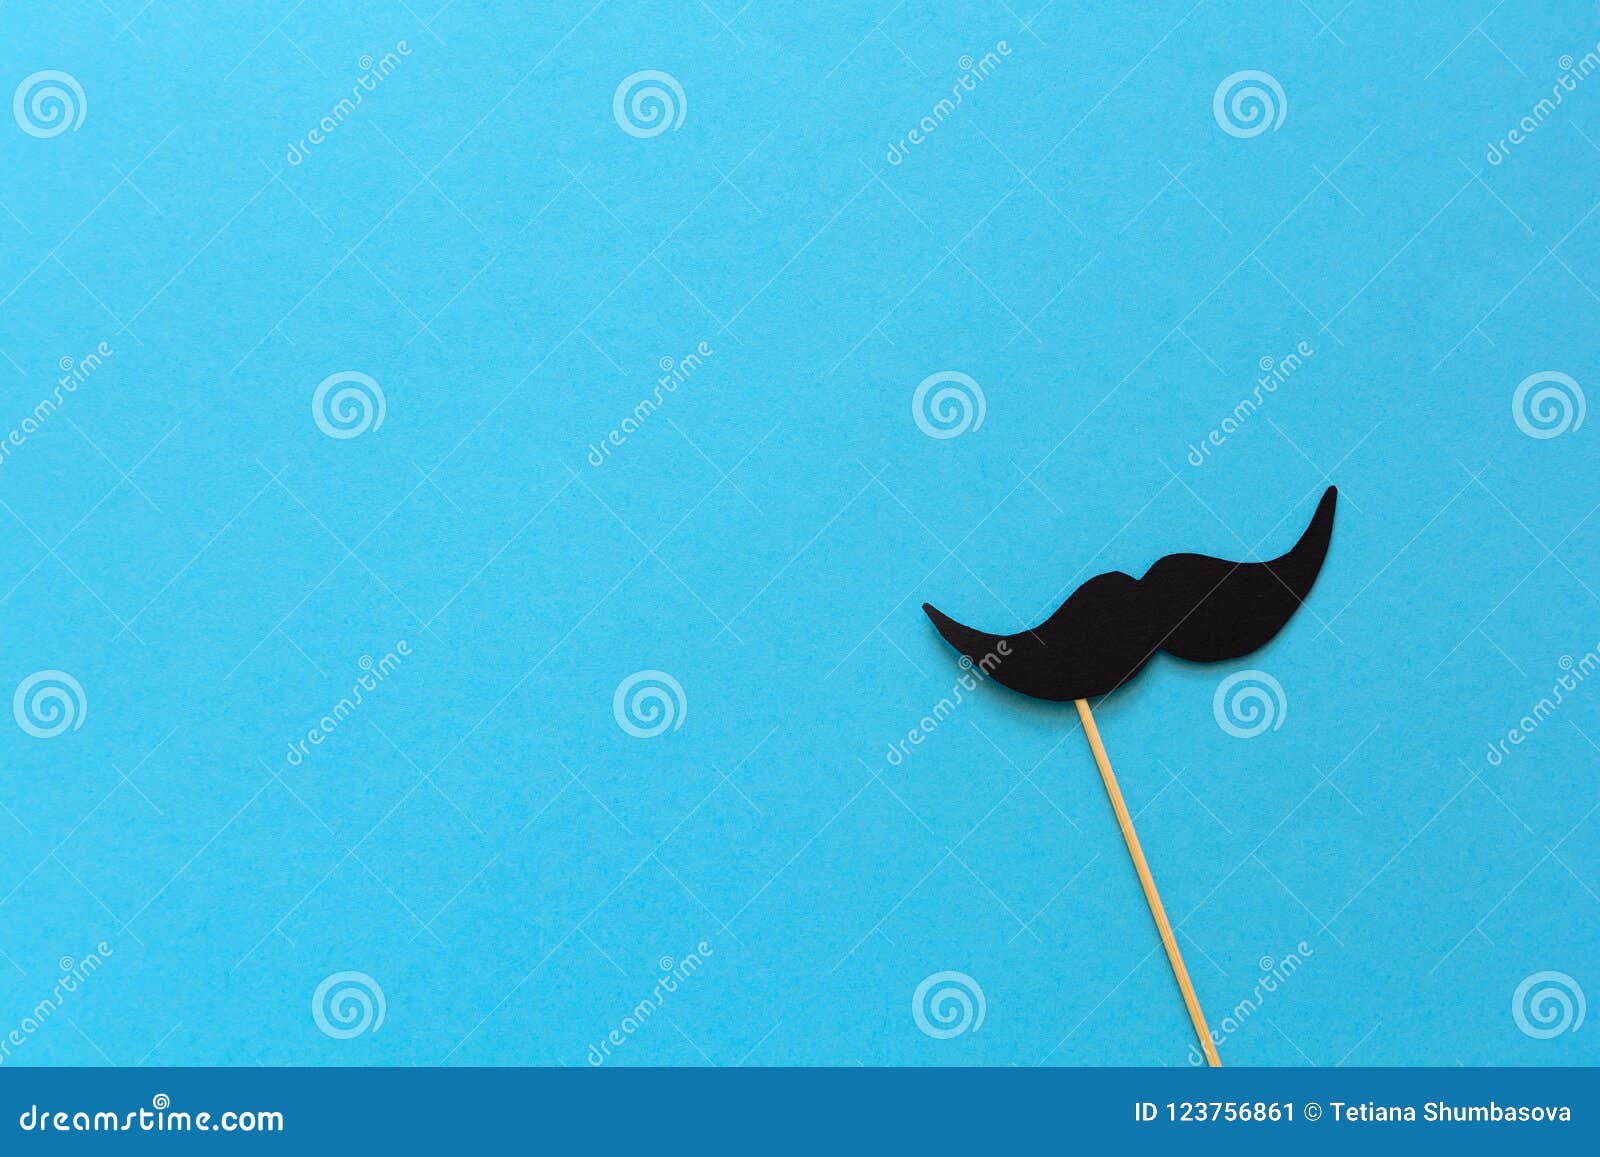 paper mustache on booth props on blue paper background. cut out style. movember concept.